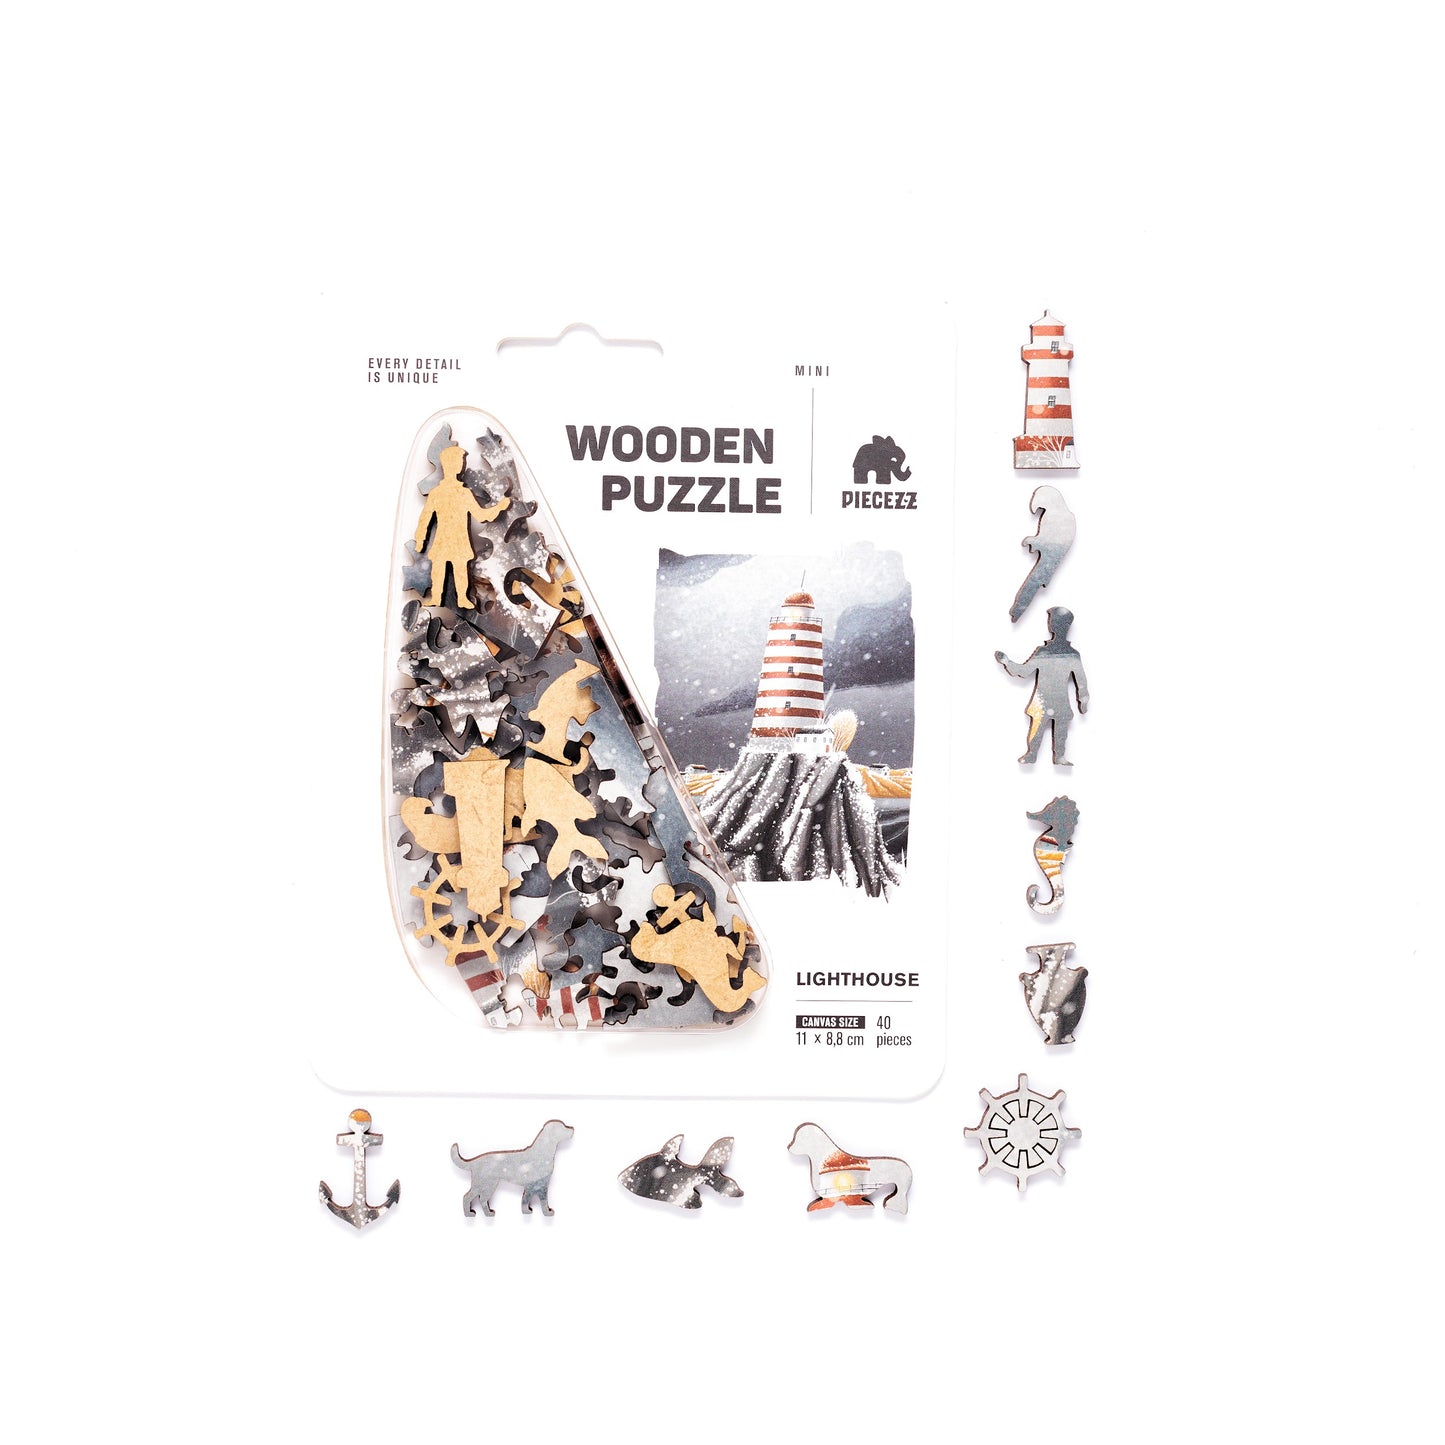 Lighthouse Pocket Size Piecezz Wooden Puzzle, Animal Shaped Puzzle (5x7x 0.5 in)